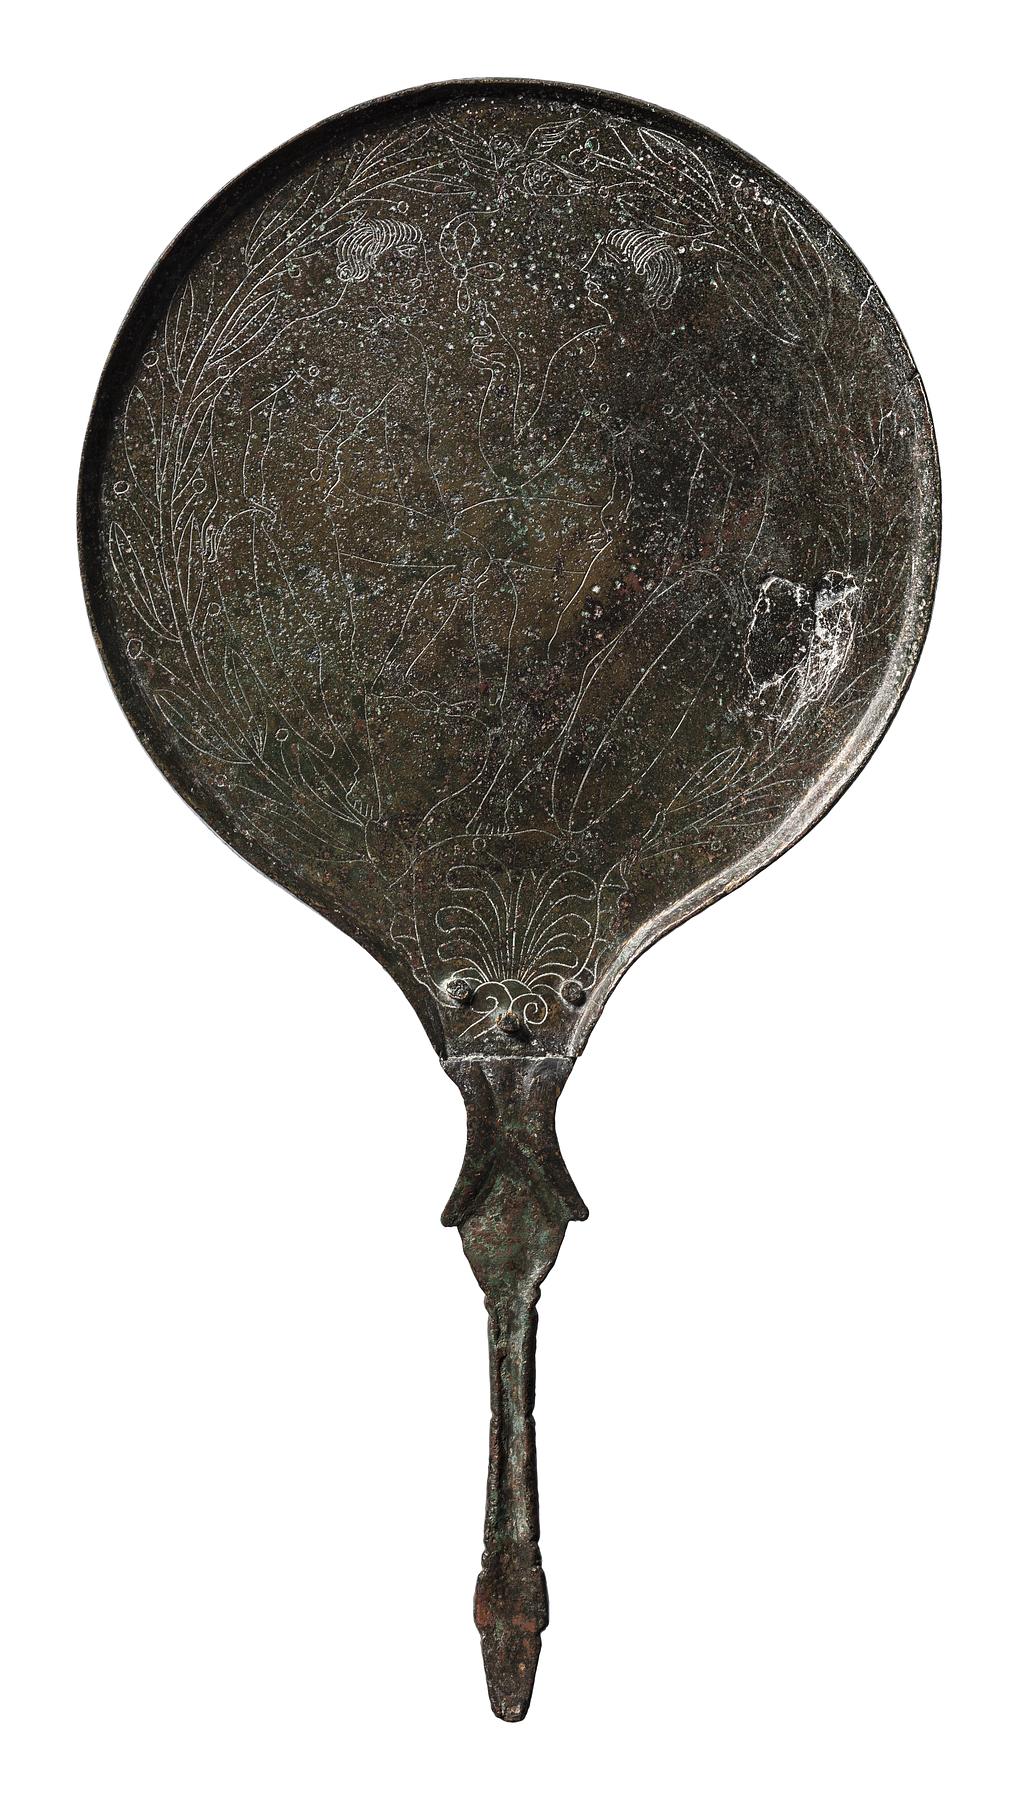 Mirror with the Dioscuri Castor and Pollux (?), H2158